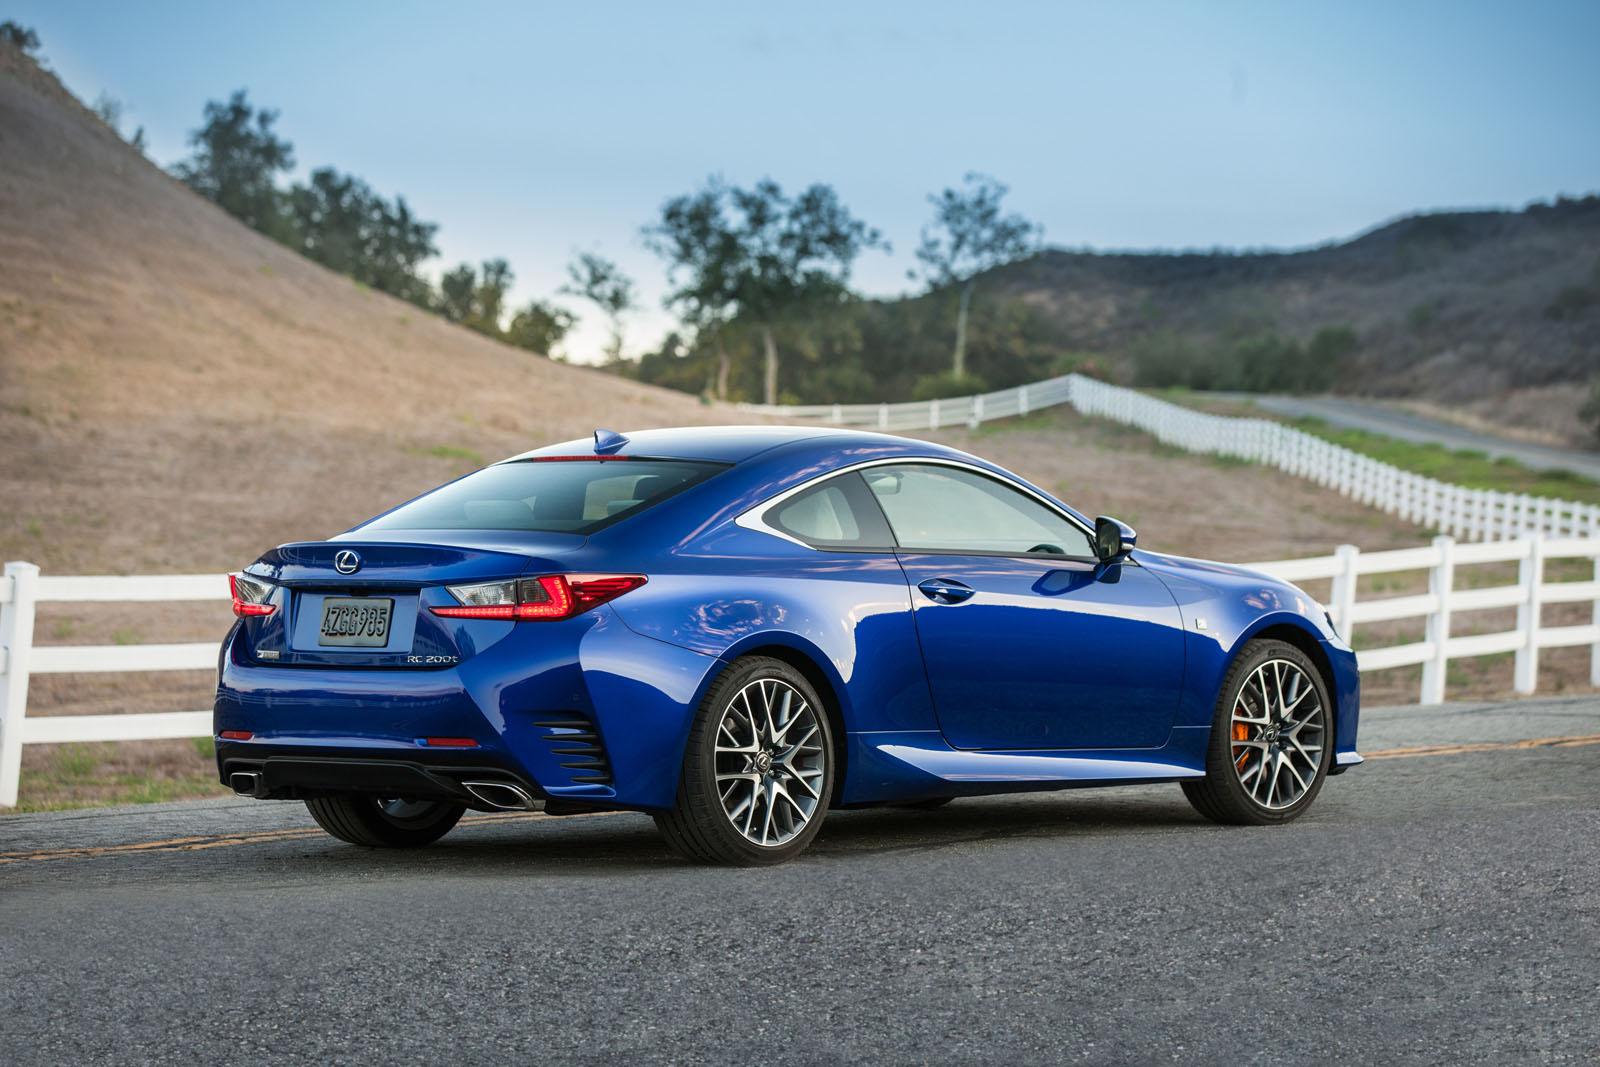 2016 Lexus RC Coupe Revealed, Gets 200t Model with 241 HP 2-liter Turbo